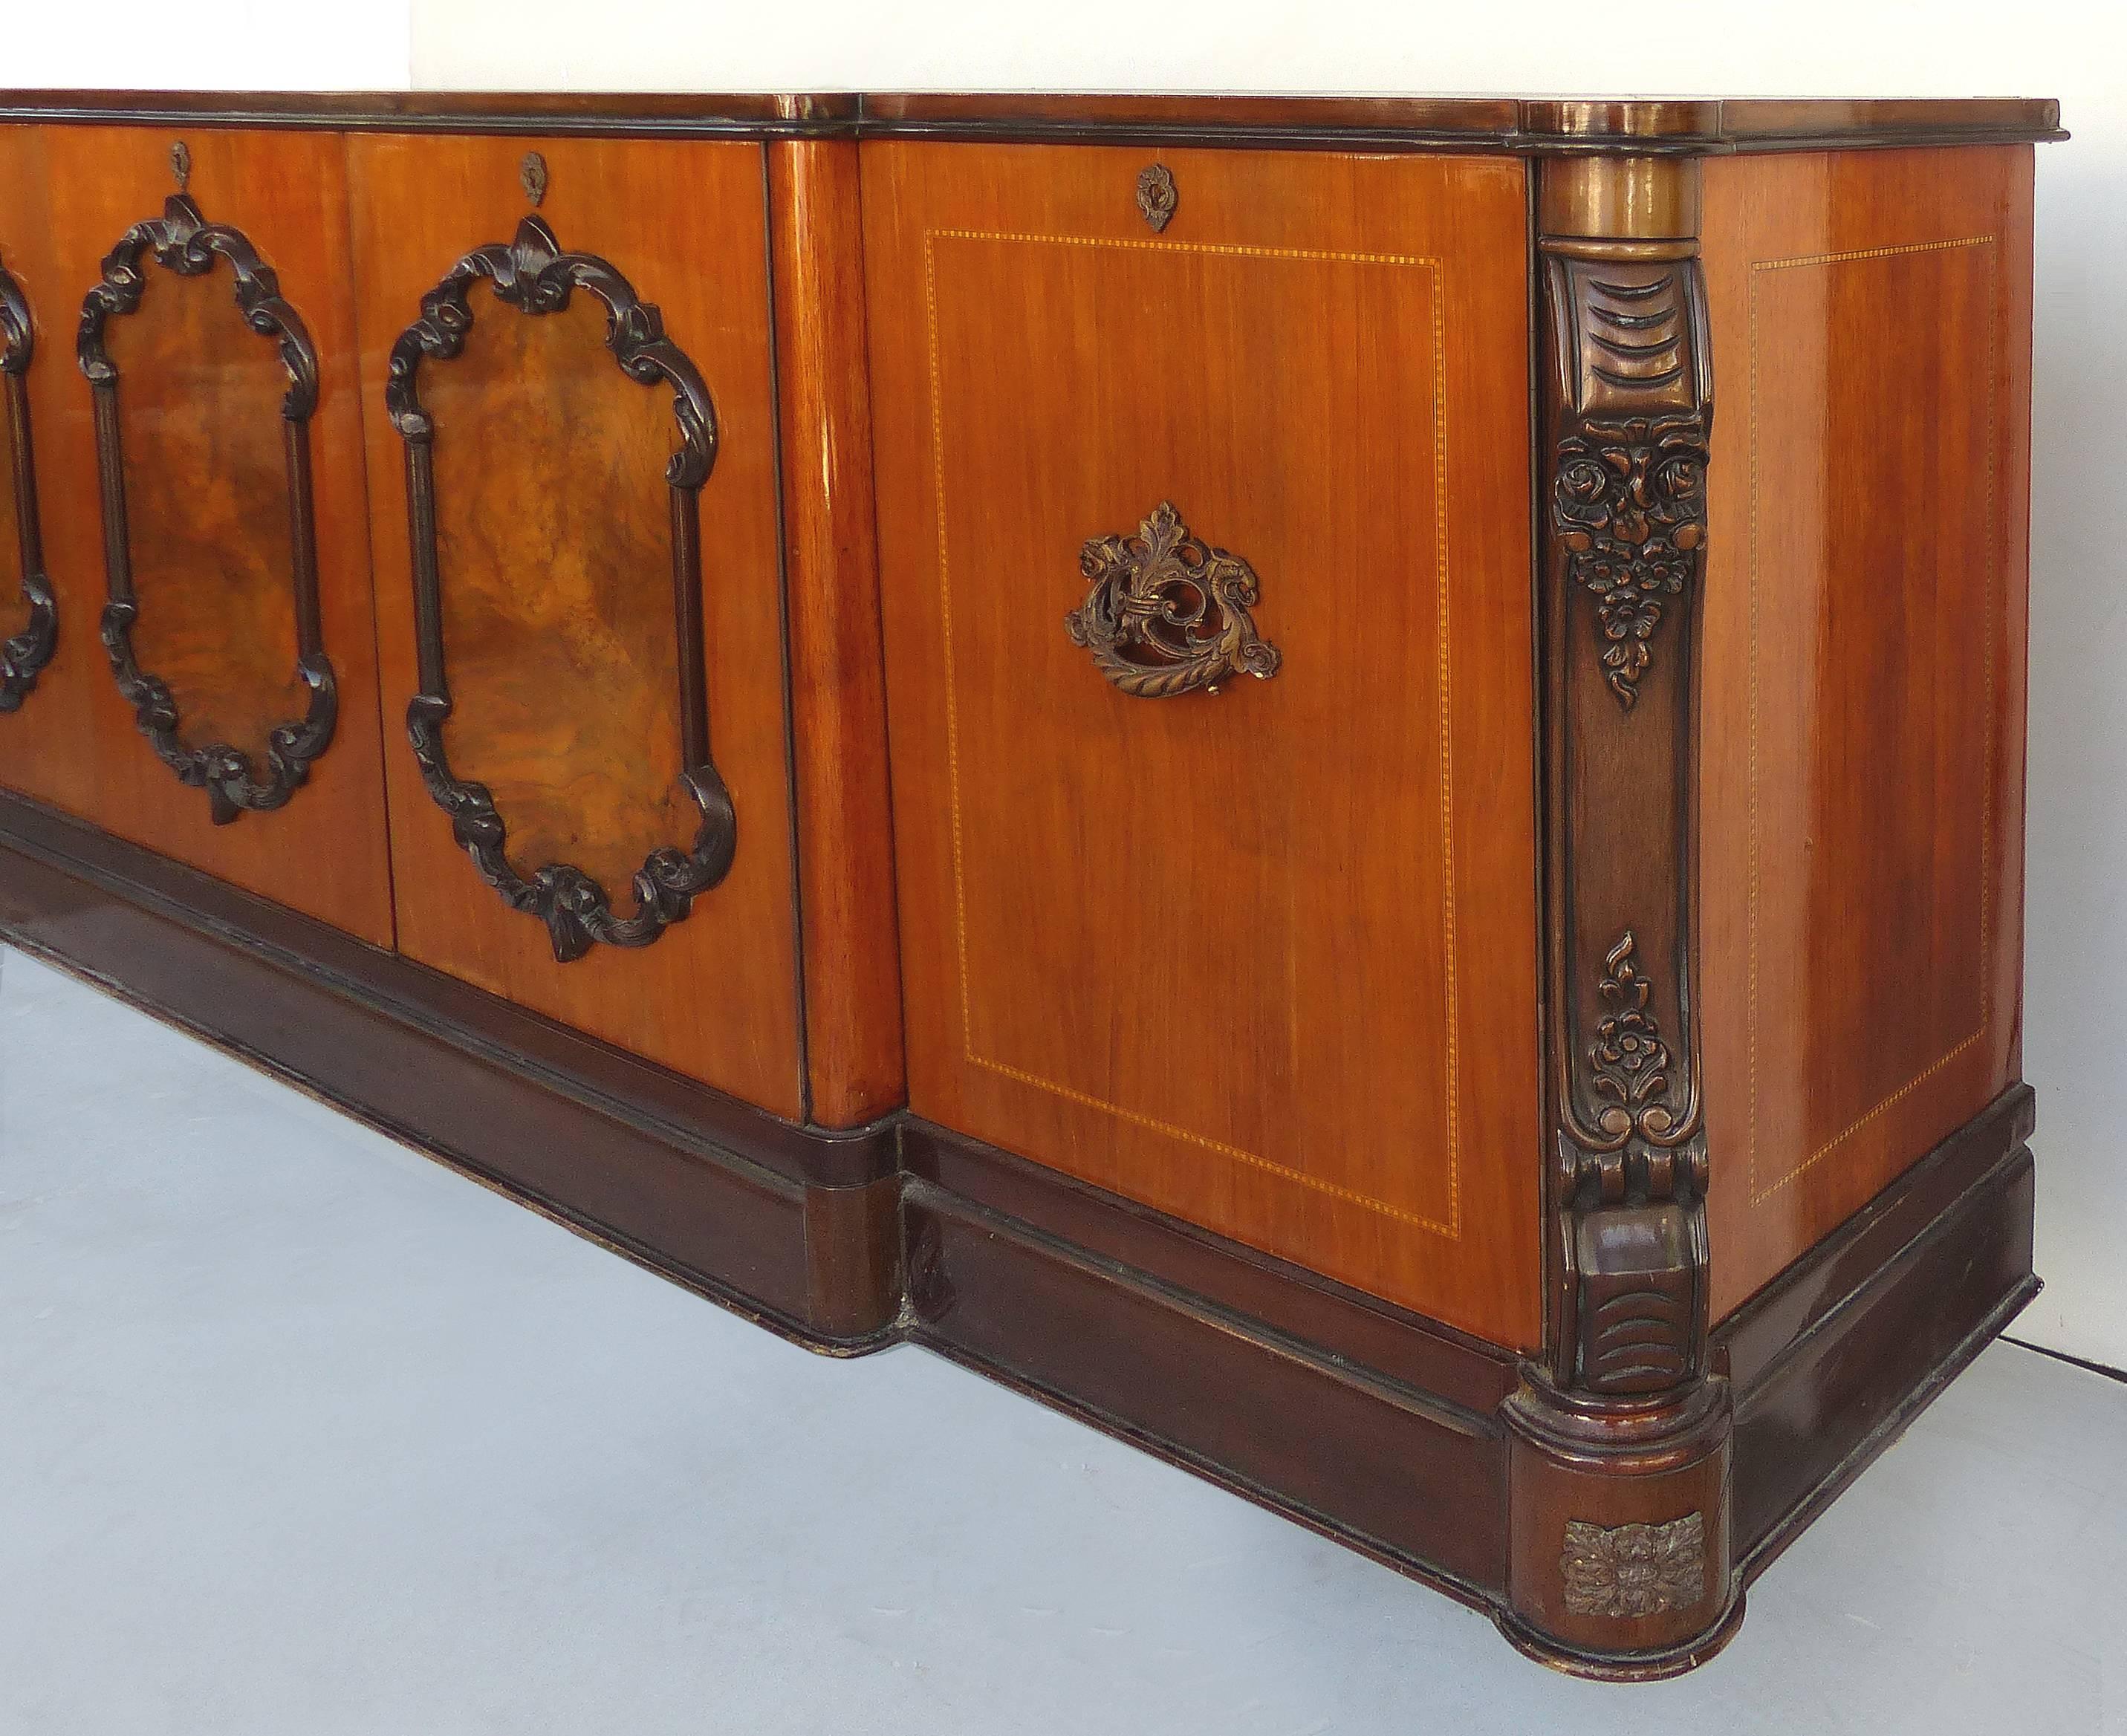 Mahogany, Walnut, Satinwood Italian Sideboard Credenza

Offered for sale is a fine-quality Italian classical sideboard/credenza made of mahogany and walnut with satinwood banding and ebonized wood-applied decorative molding. Mahogany doors with